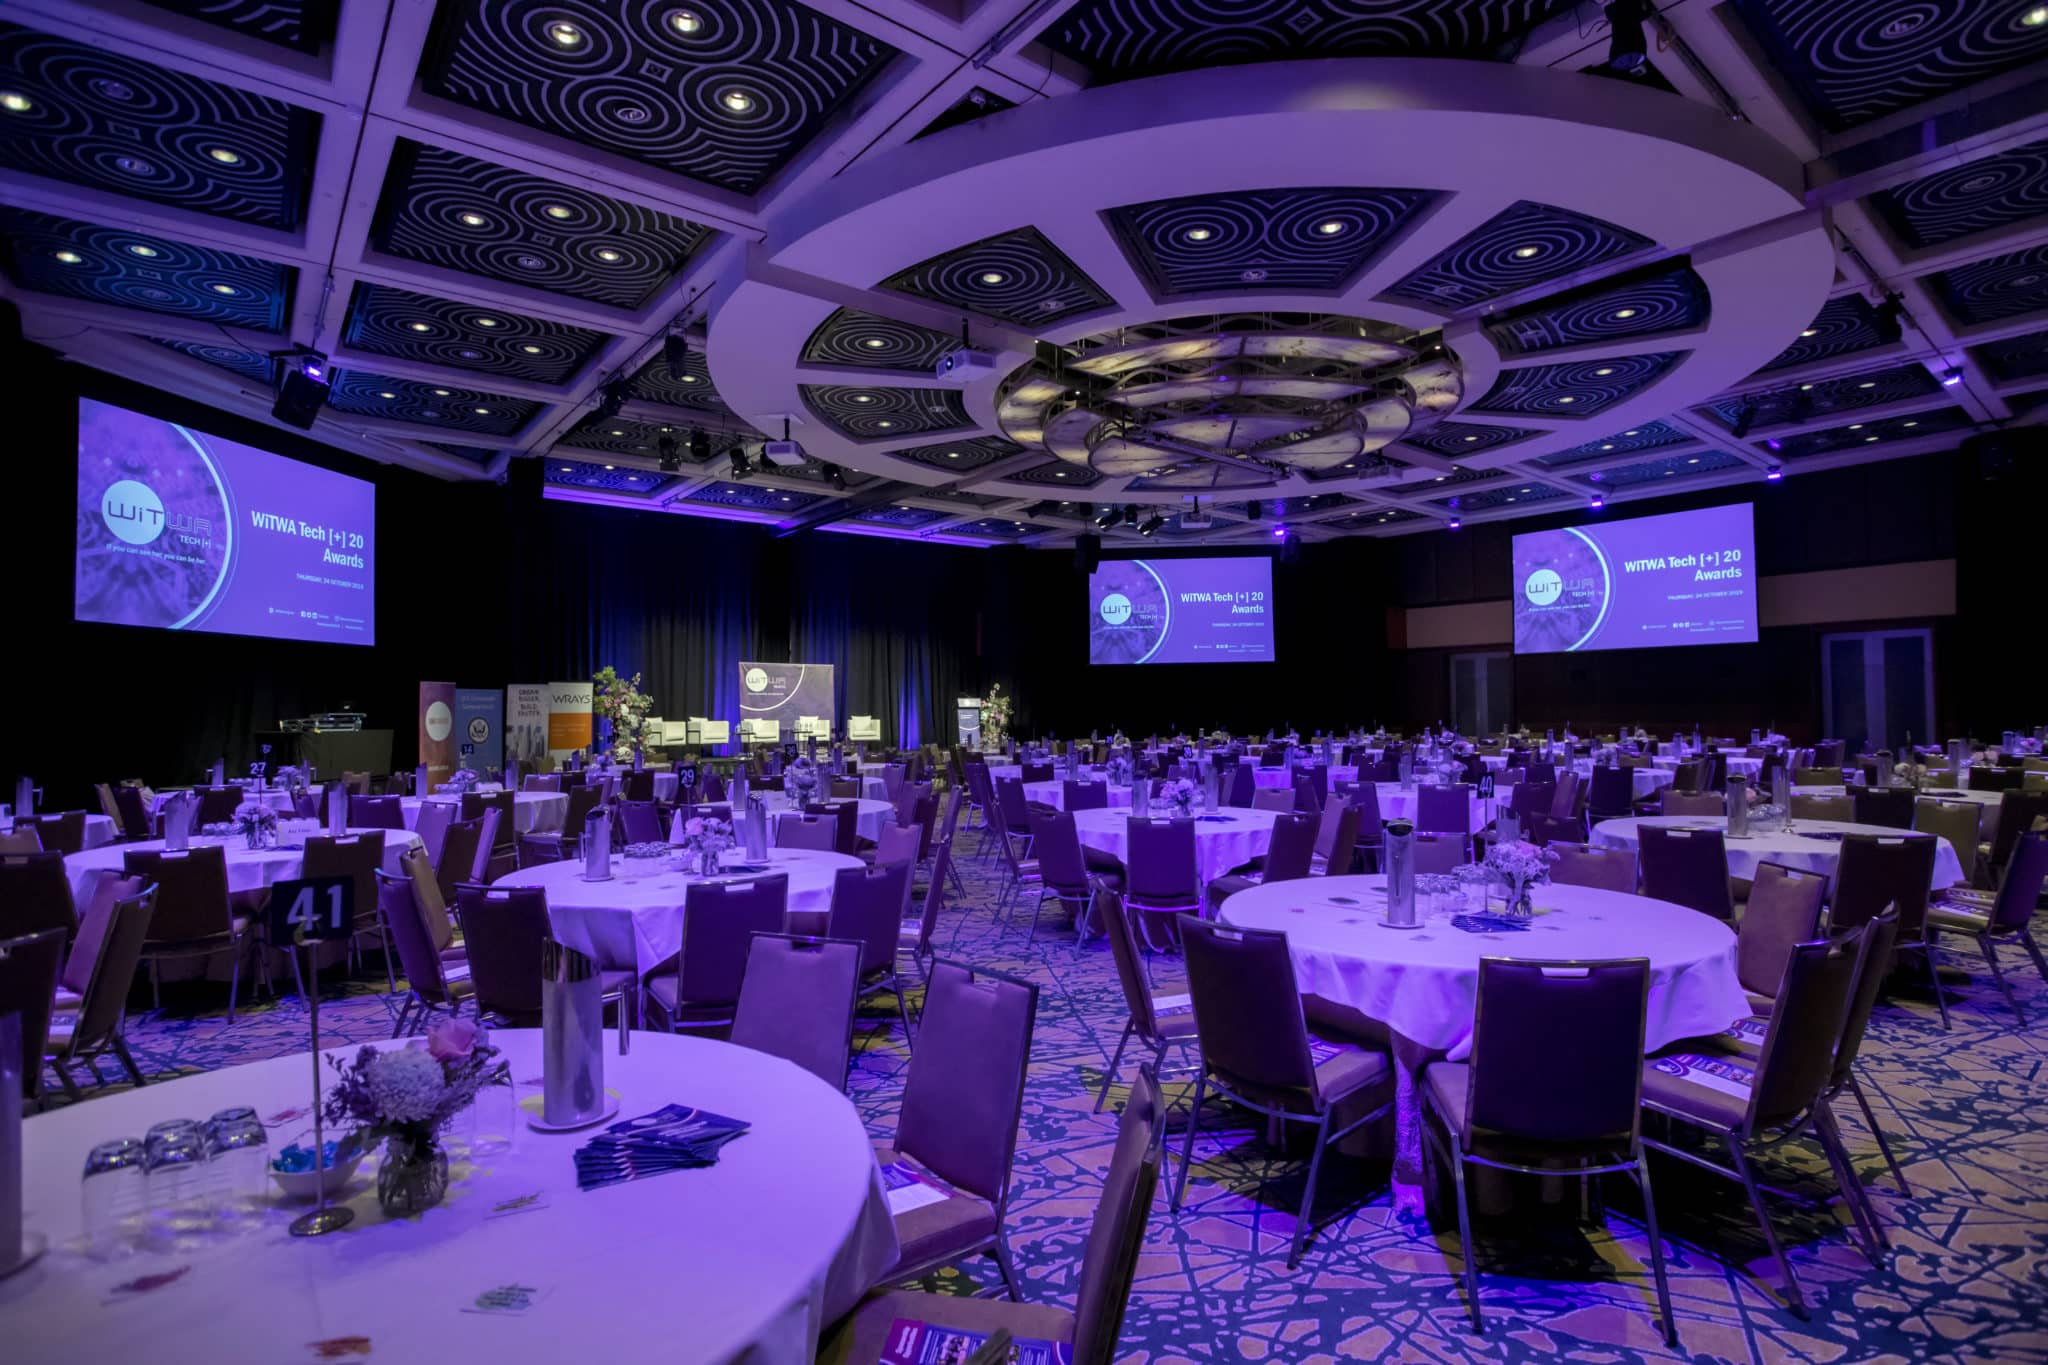 WiTWA [+] Conference ballroom set up table decor with purple lights